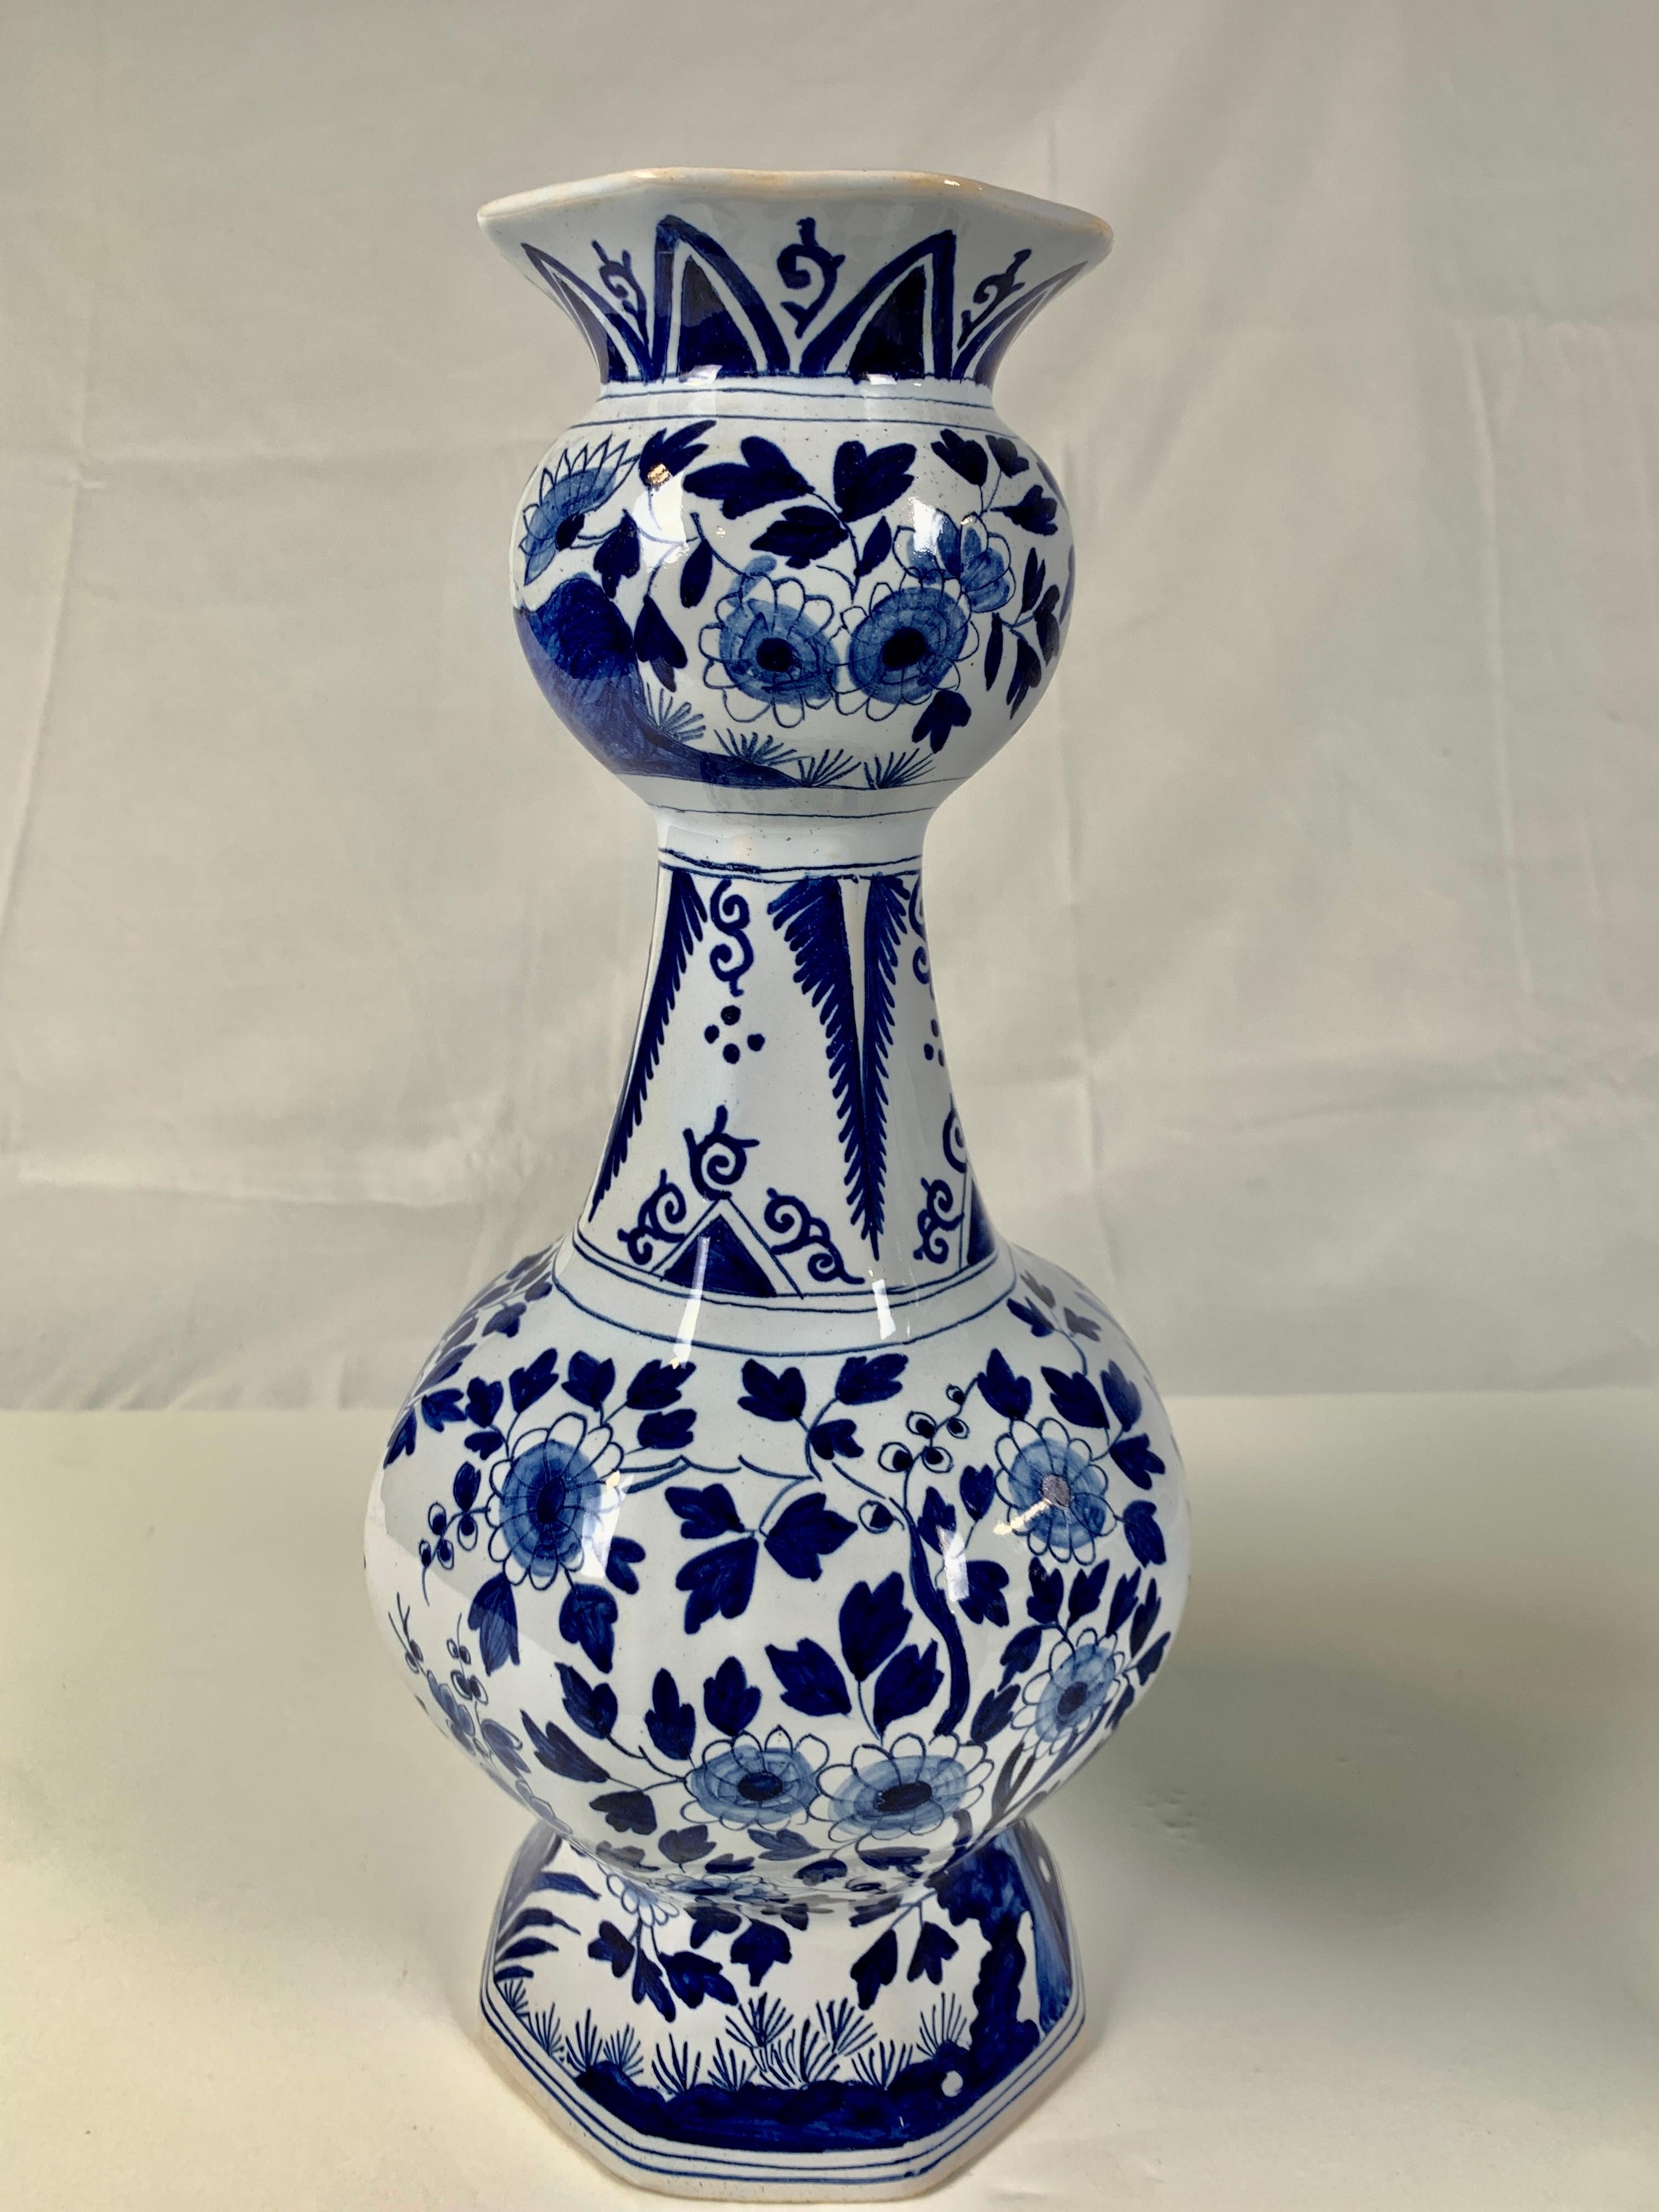 This pair of Delft-style vases were made in France circa 1900 by the esteemed firm of Edmé Samson et Cie.
 We see flowering trees and rockwork. The vases have a traditional soft-edged octagonal shape and beautiful Delft decoration. The two vases